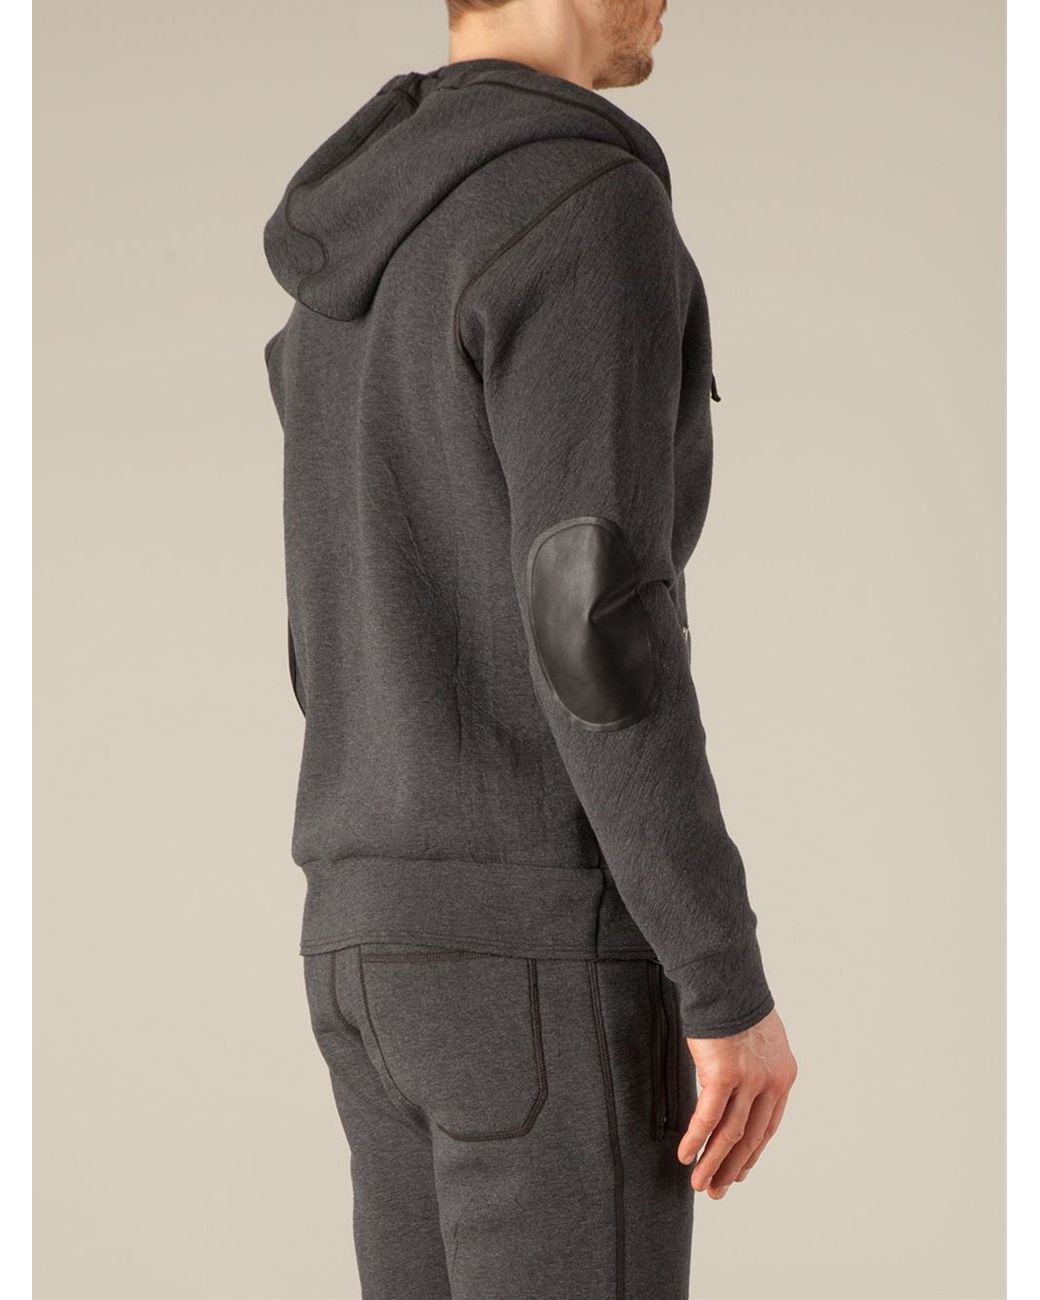 Lanvin Elbow Patch Hoodie in Gray for Men | Lyst